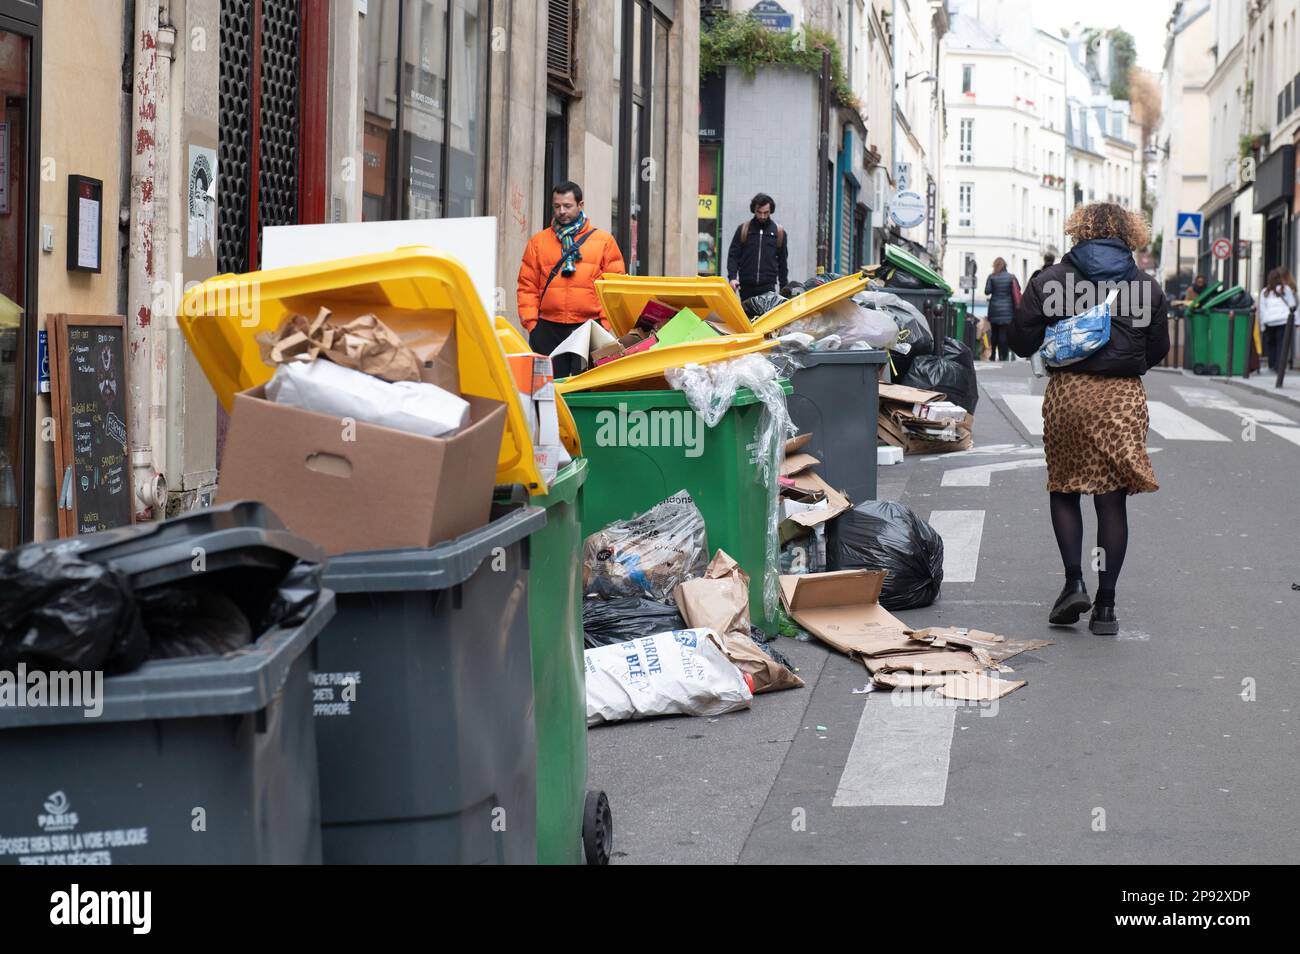 On March 10, 2023, in the 2nd district of Paris, trash cans and rubbish  pile up on the sidewalks, following a garbage collectors' strike, in  protest against the government's pension reform project.